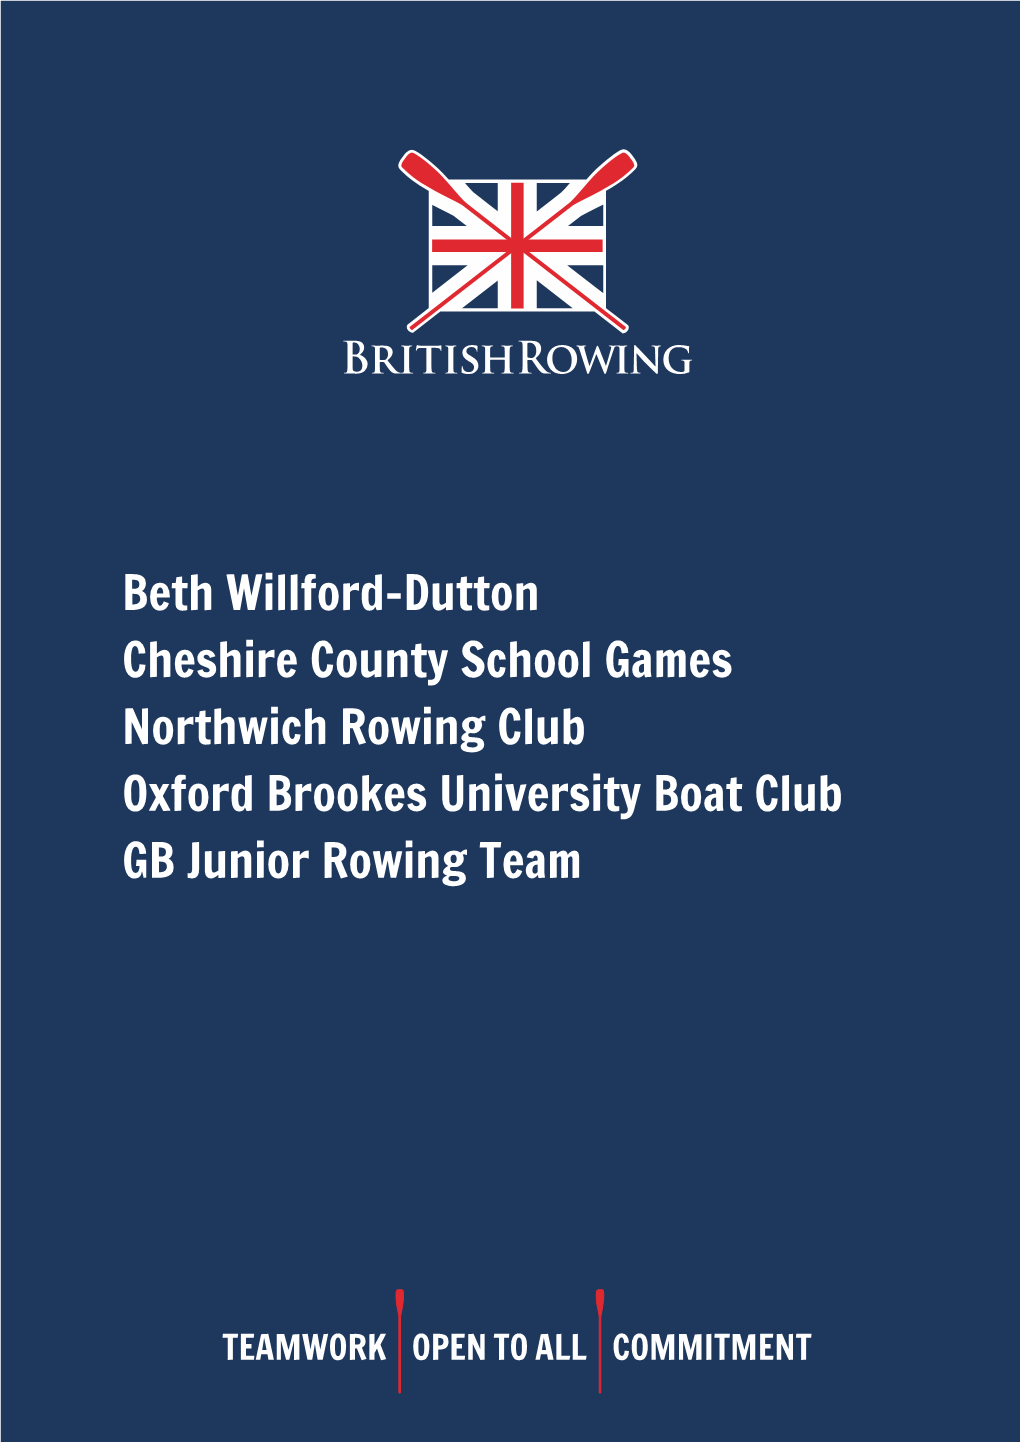 Beth Willford-Dutton Cheshire County School Games Northwich Rowing Club Oxford Brookes University Boat Club